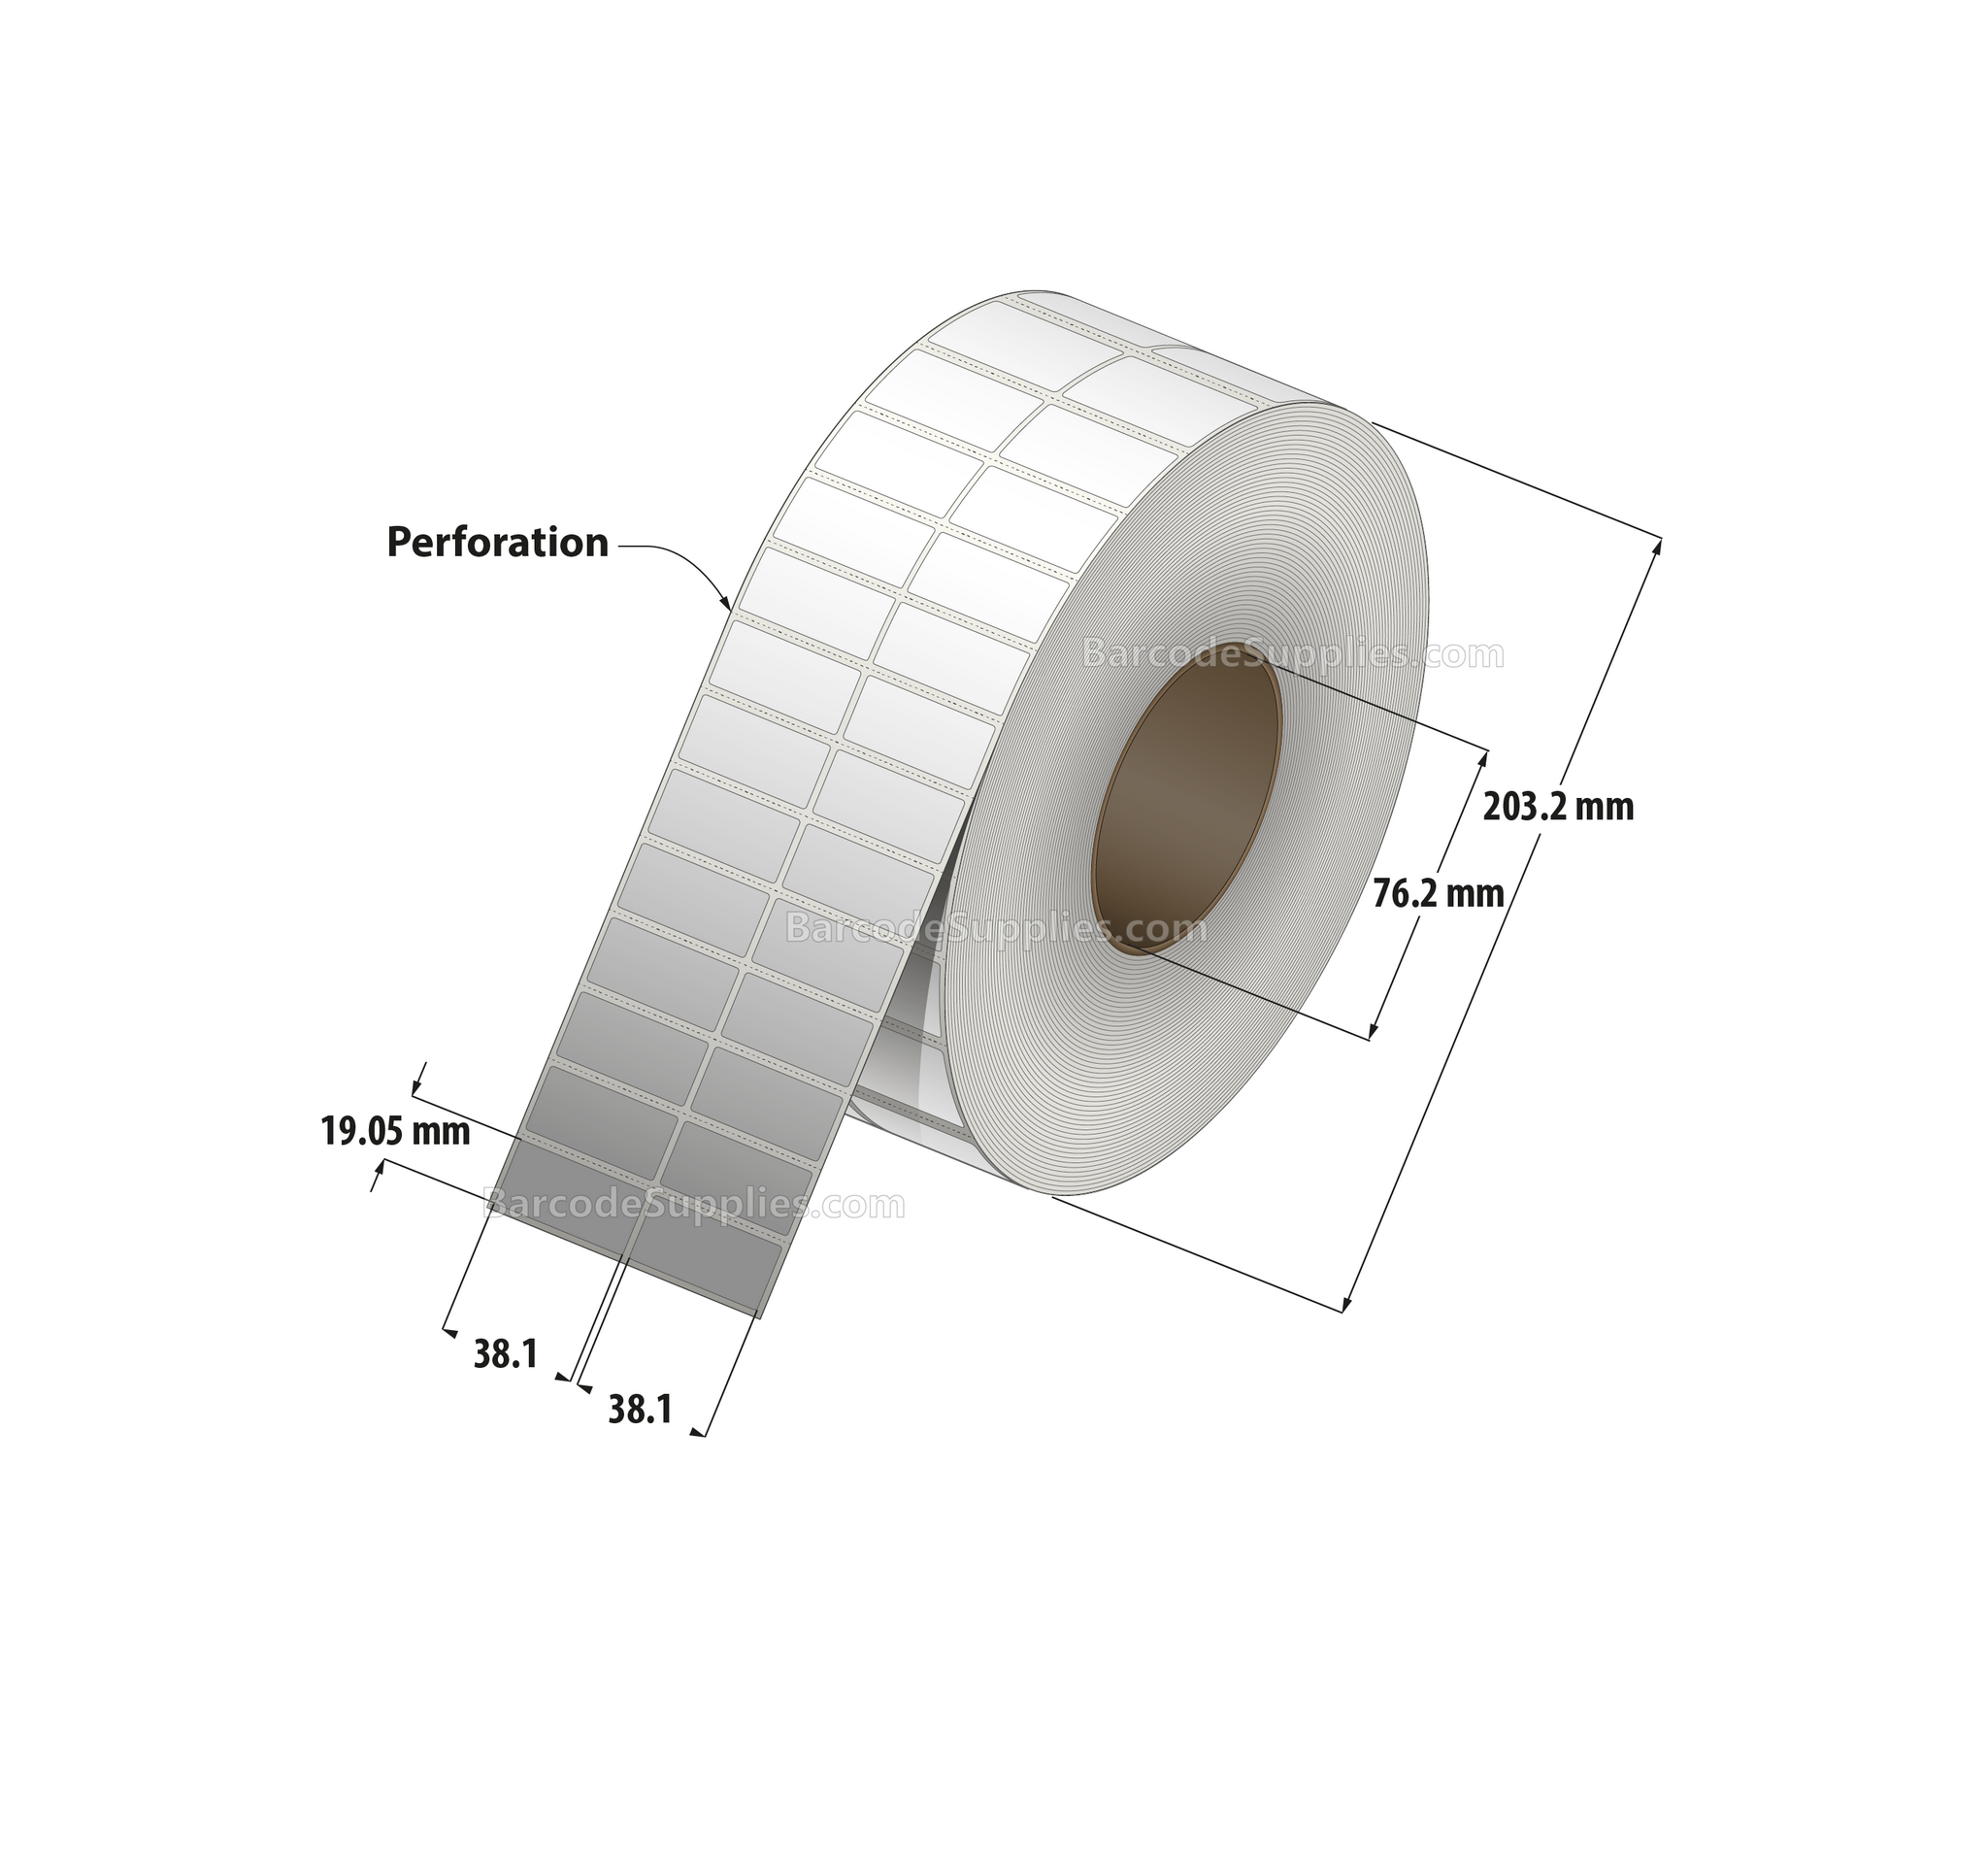 1.5 x 0.75 Thermal Transfer White Labels With Permanent Adhesive - Perforated - 15,000 Labels Per Roll - Carton Of 4 Rolls - 60000 Labels Total - MPN: RT-15-075-15000-3